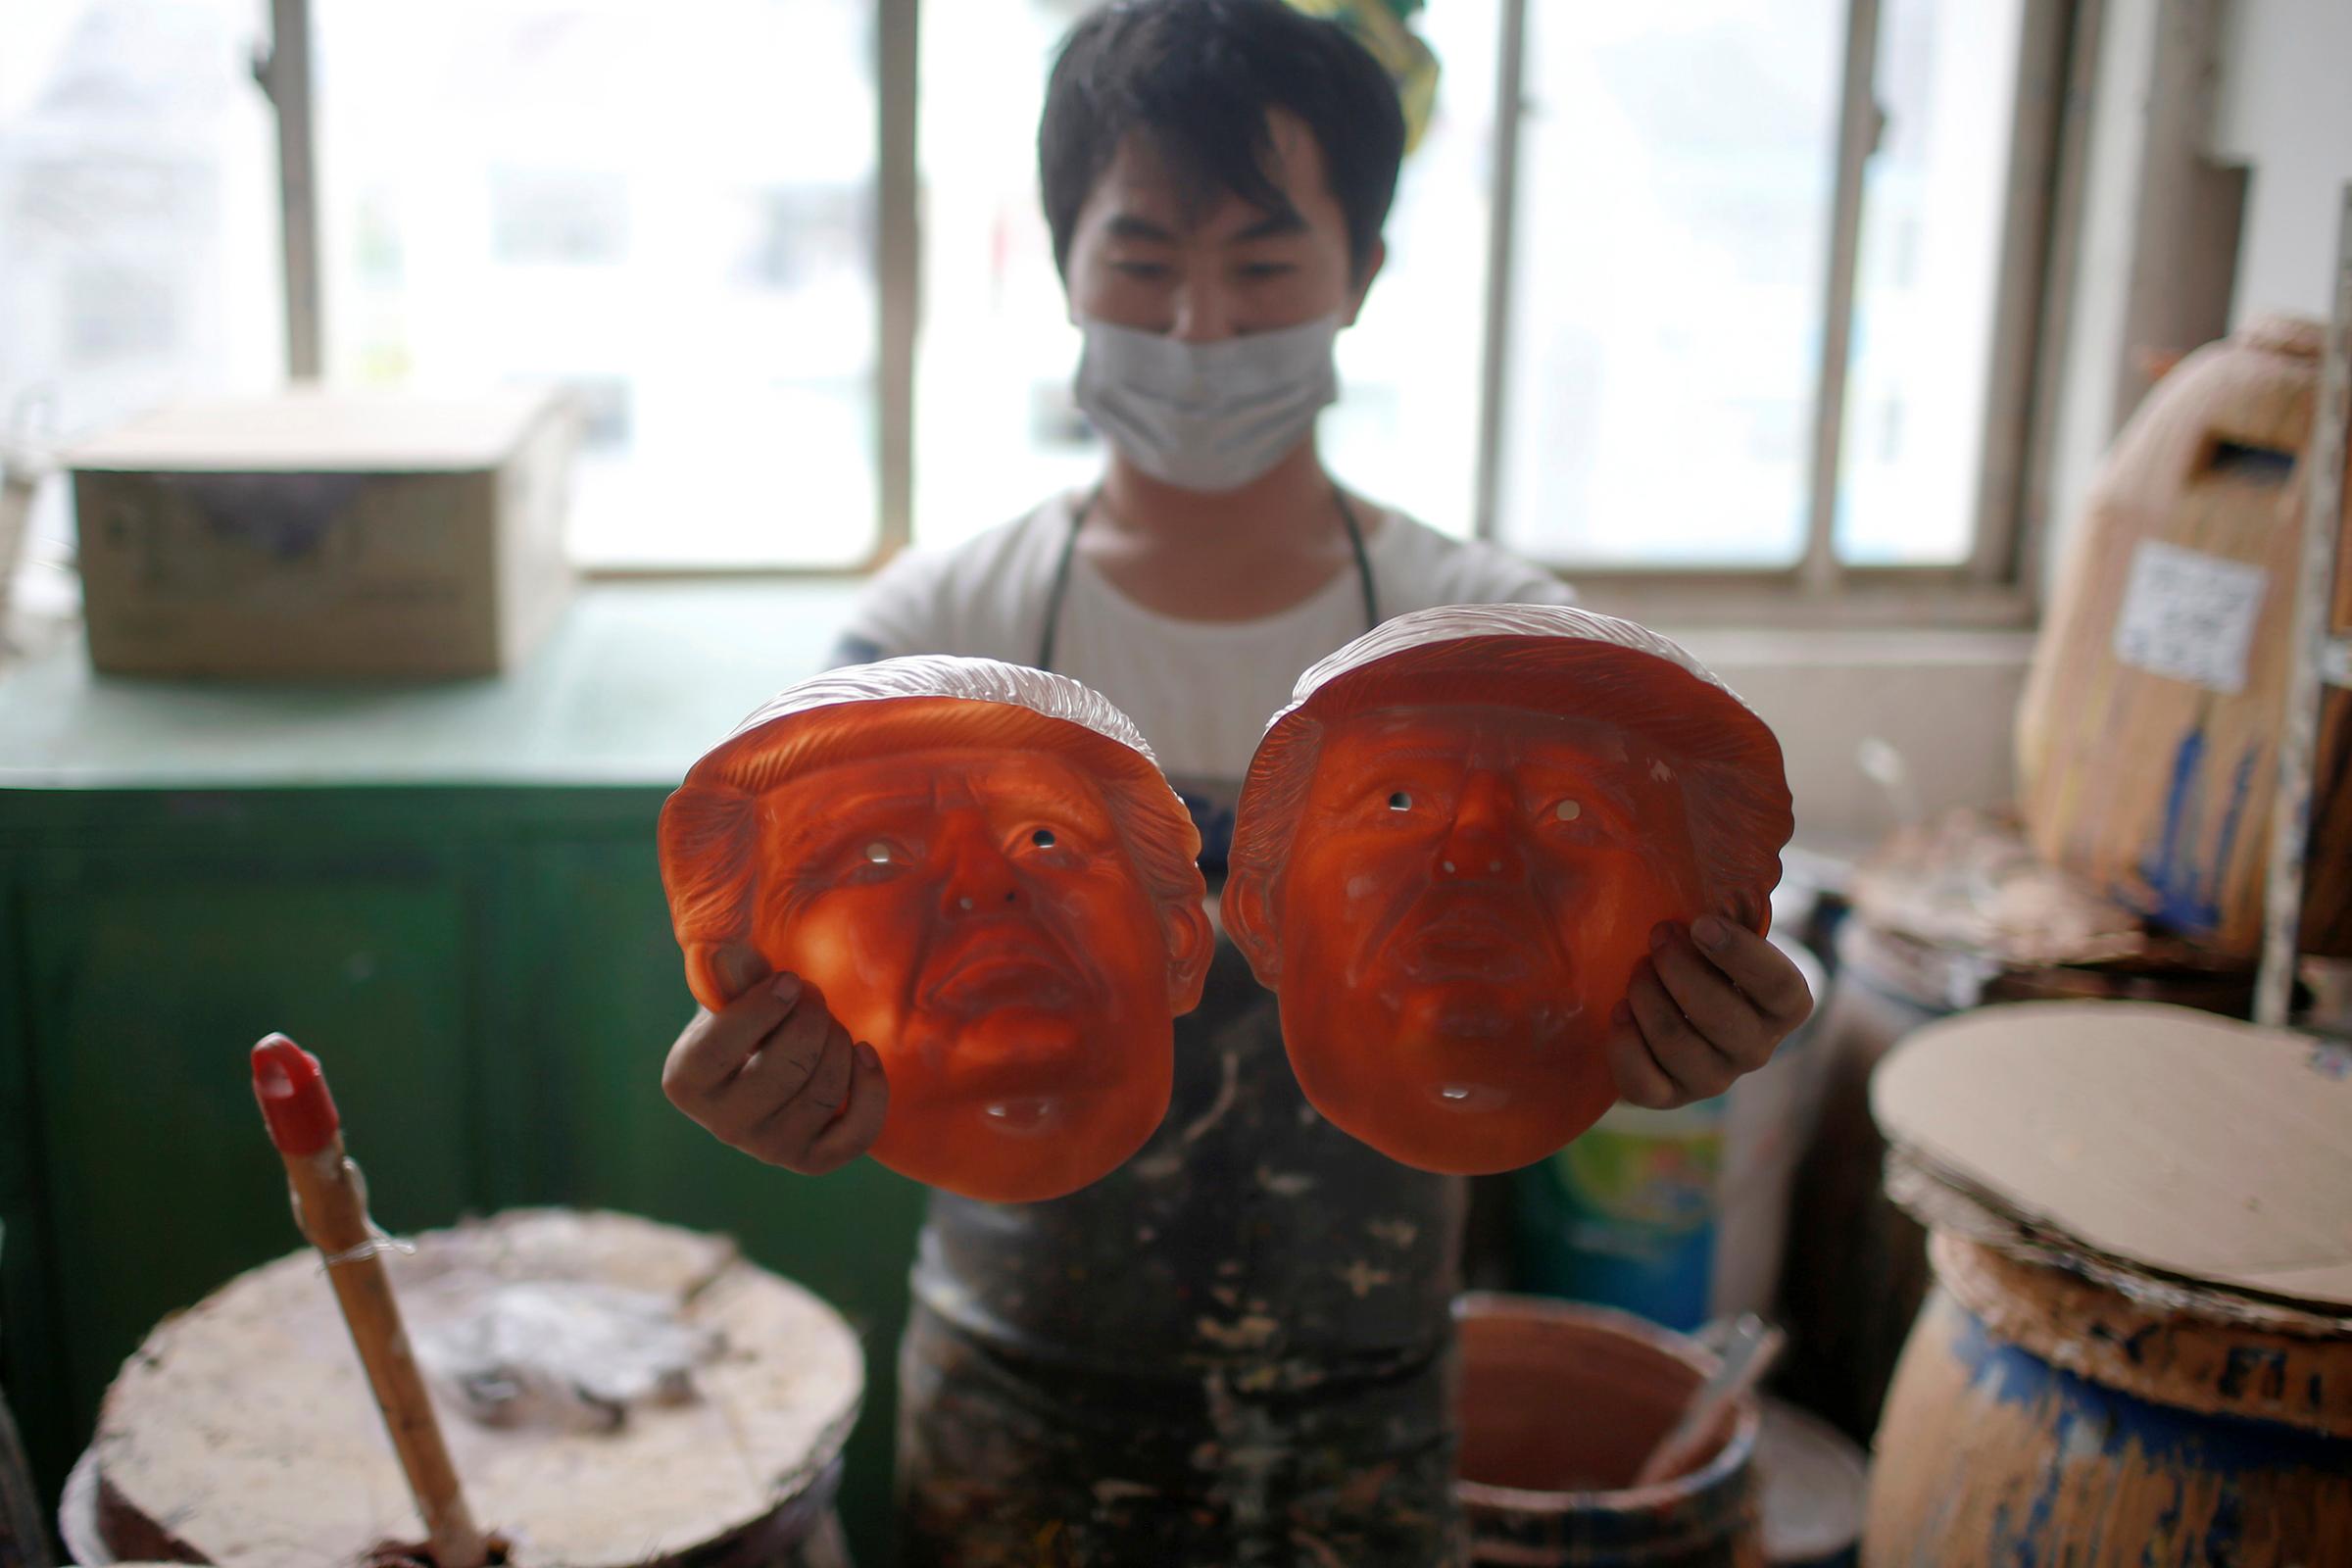 A worker checks masks of Republican presidential candidate Donald Trump at Jinhua Partytime Latex Art and Crafts Factory in Jinhua, Zhejiang Province, China, May 25, 2016.